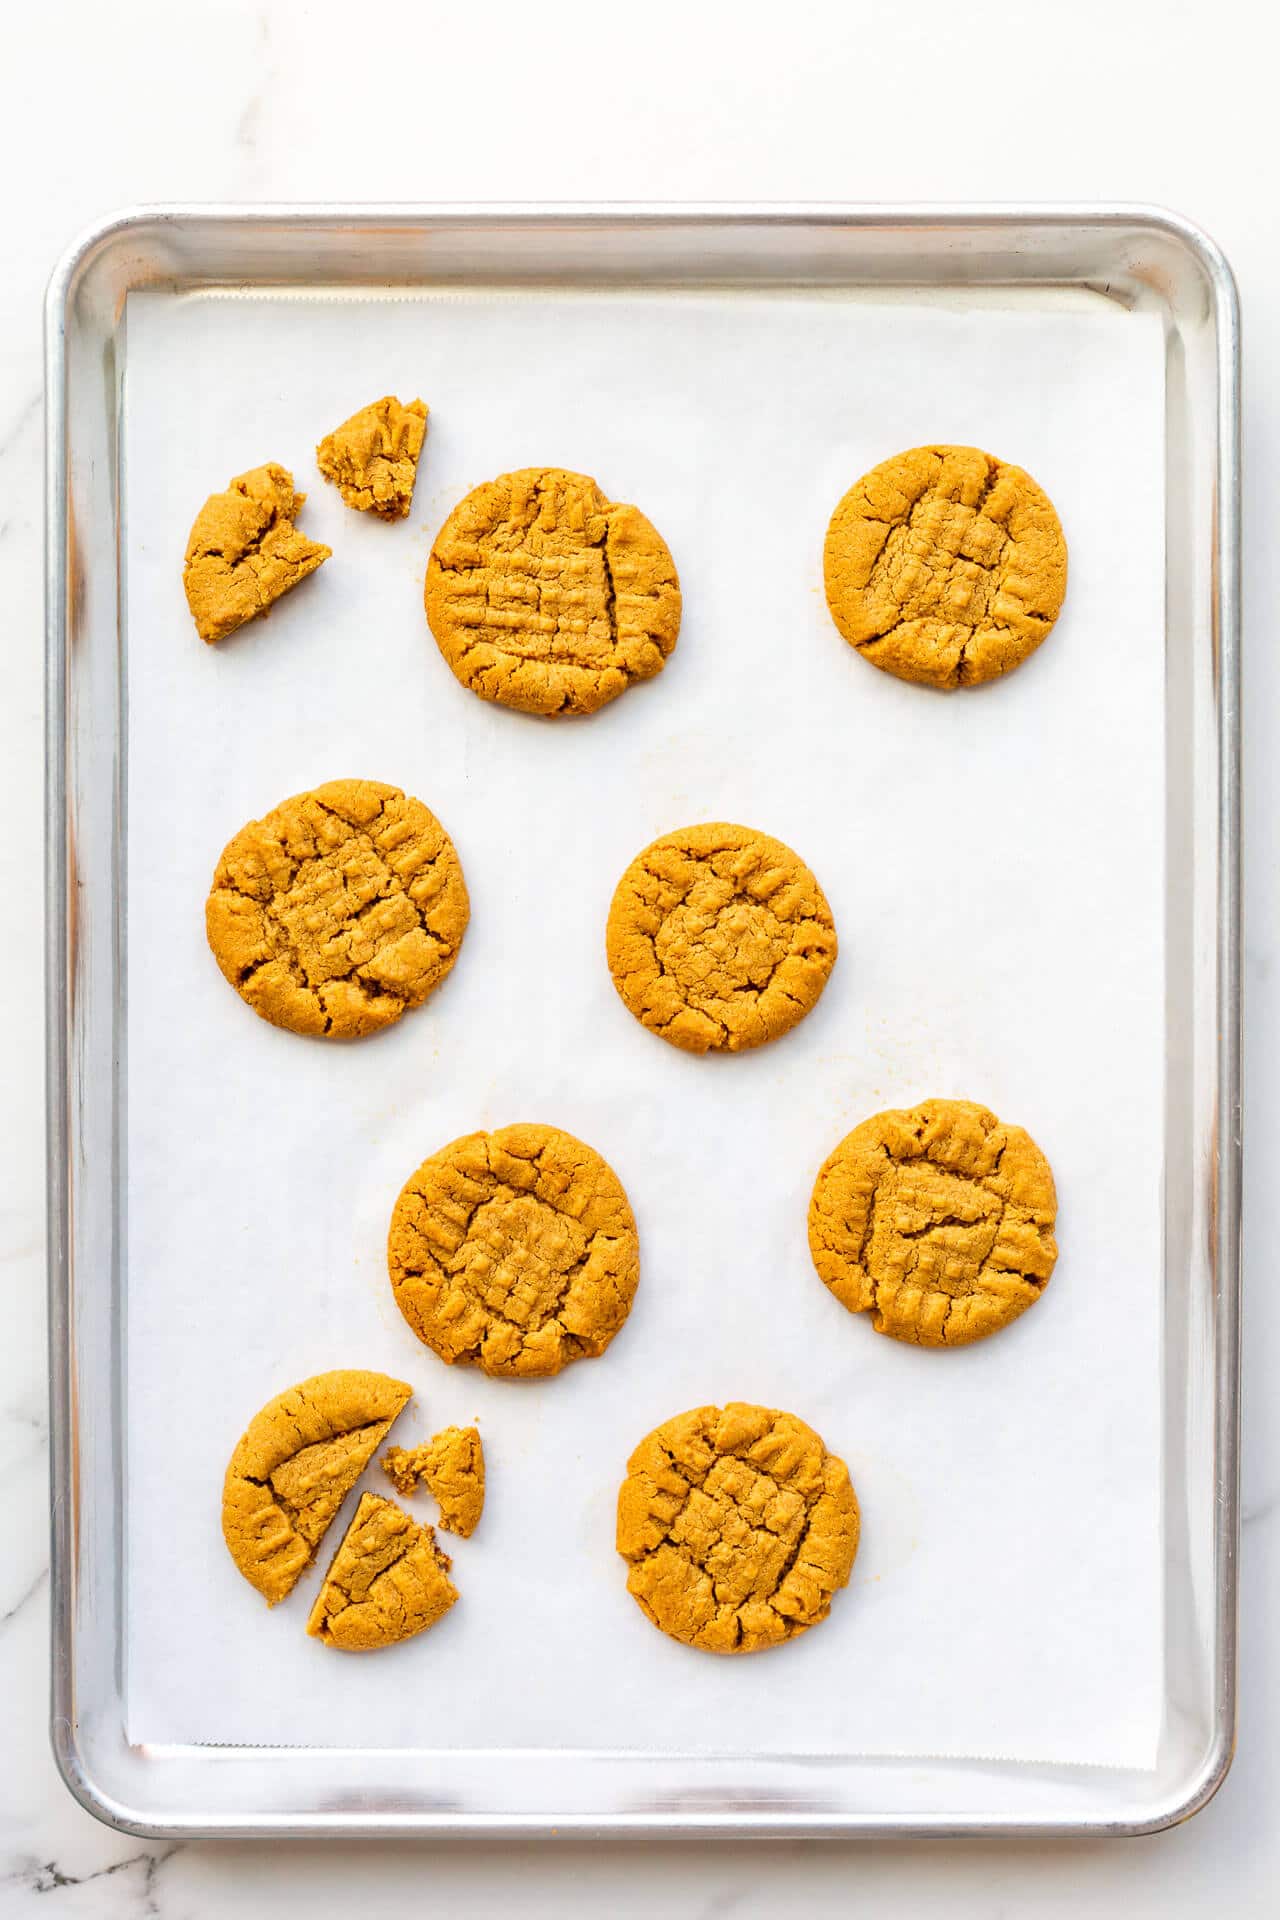 Baked flourless peanut butter cookies on a sheet pan lined with parchment with signature criss cross pattern